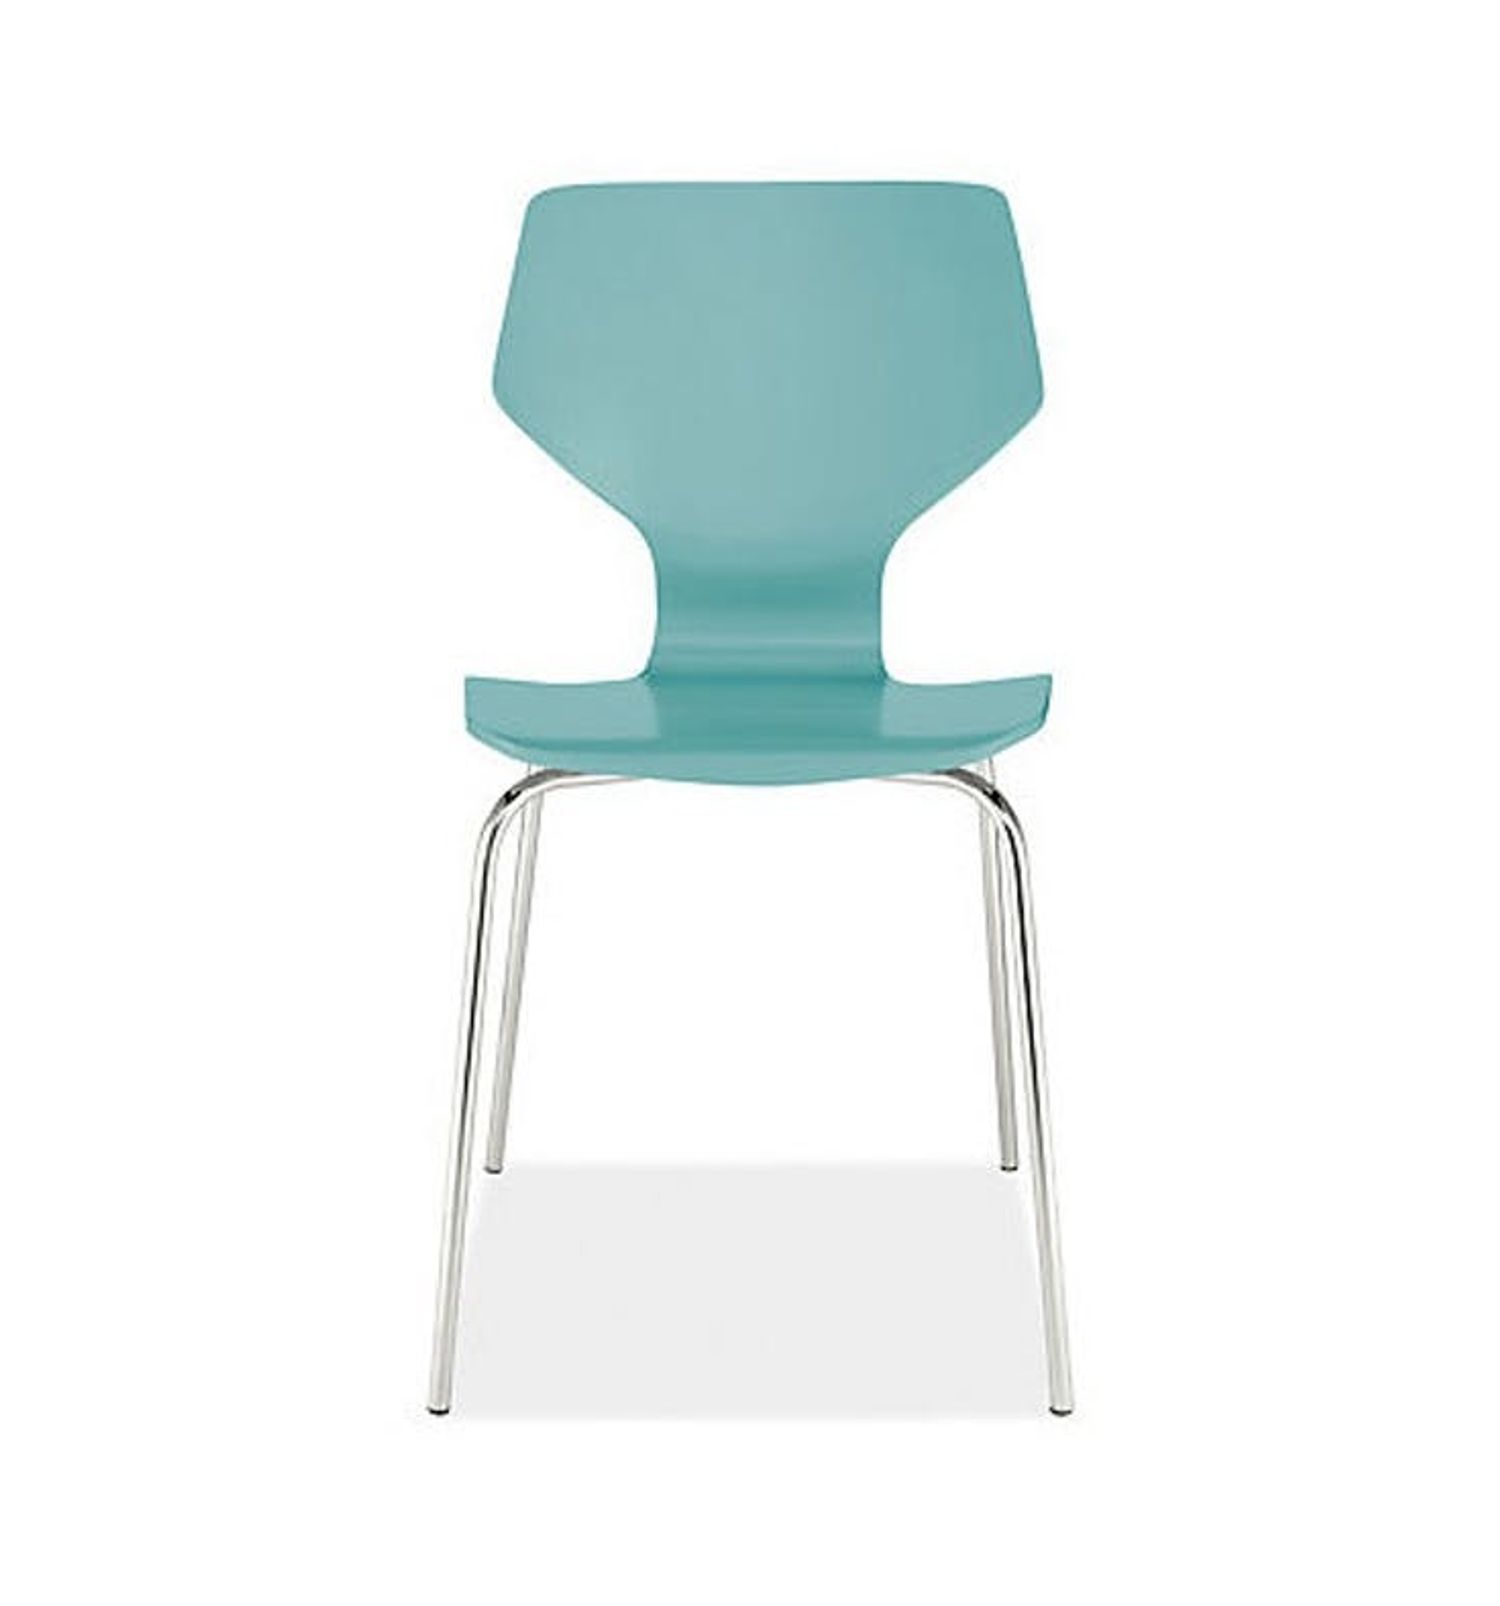 10 of Our Favorite Kid-Friendly Dining Chairs - Brit + Co